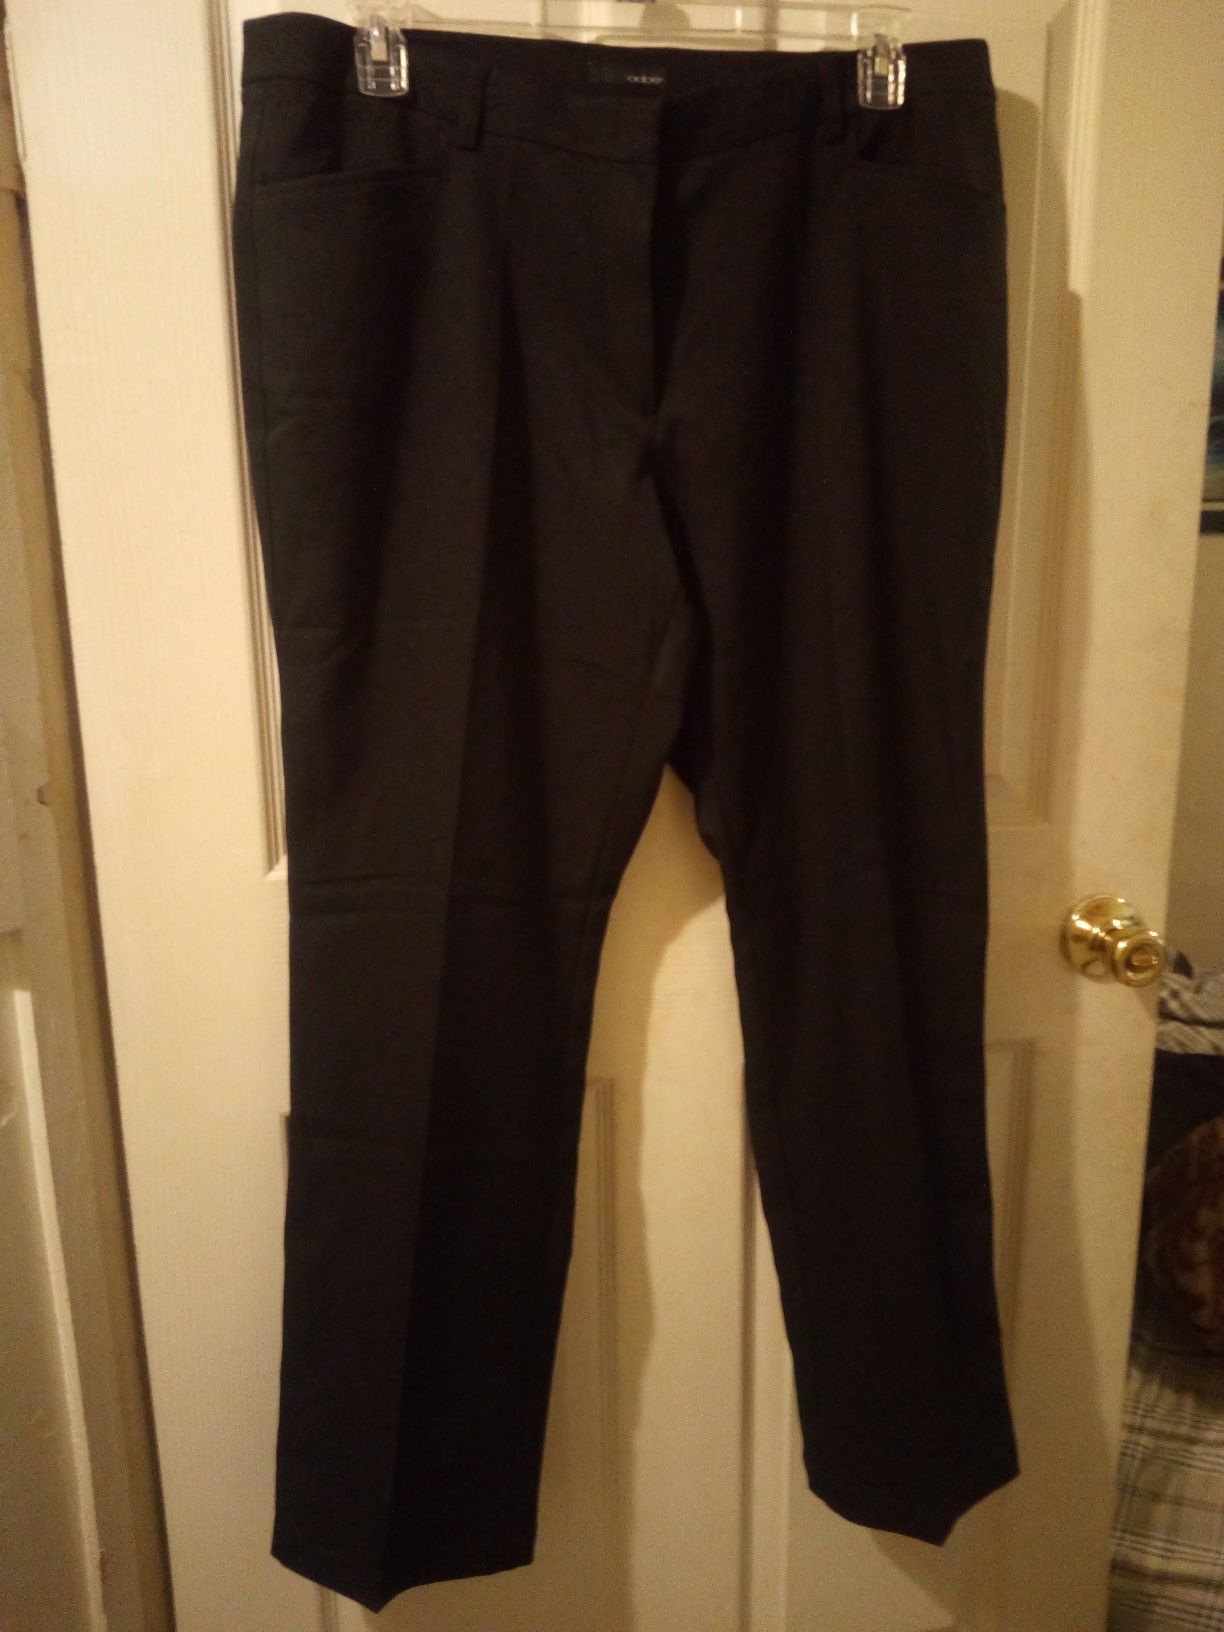 Ladies size 16 pants from oobē